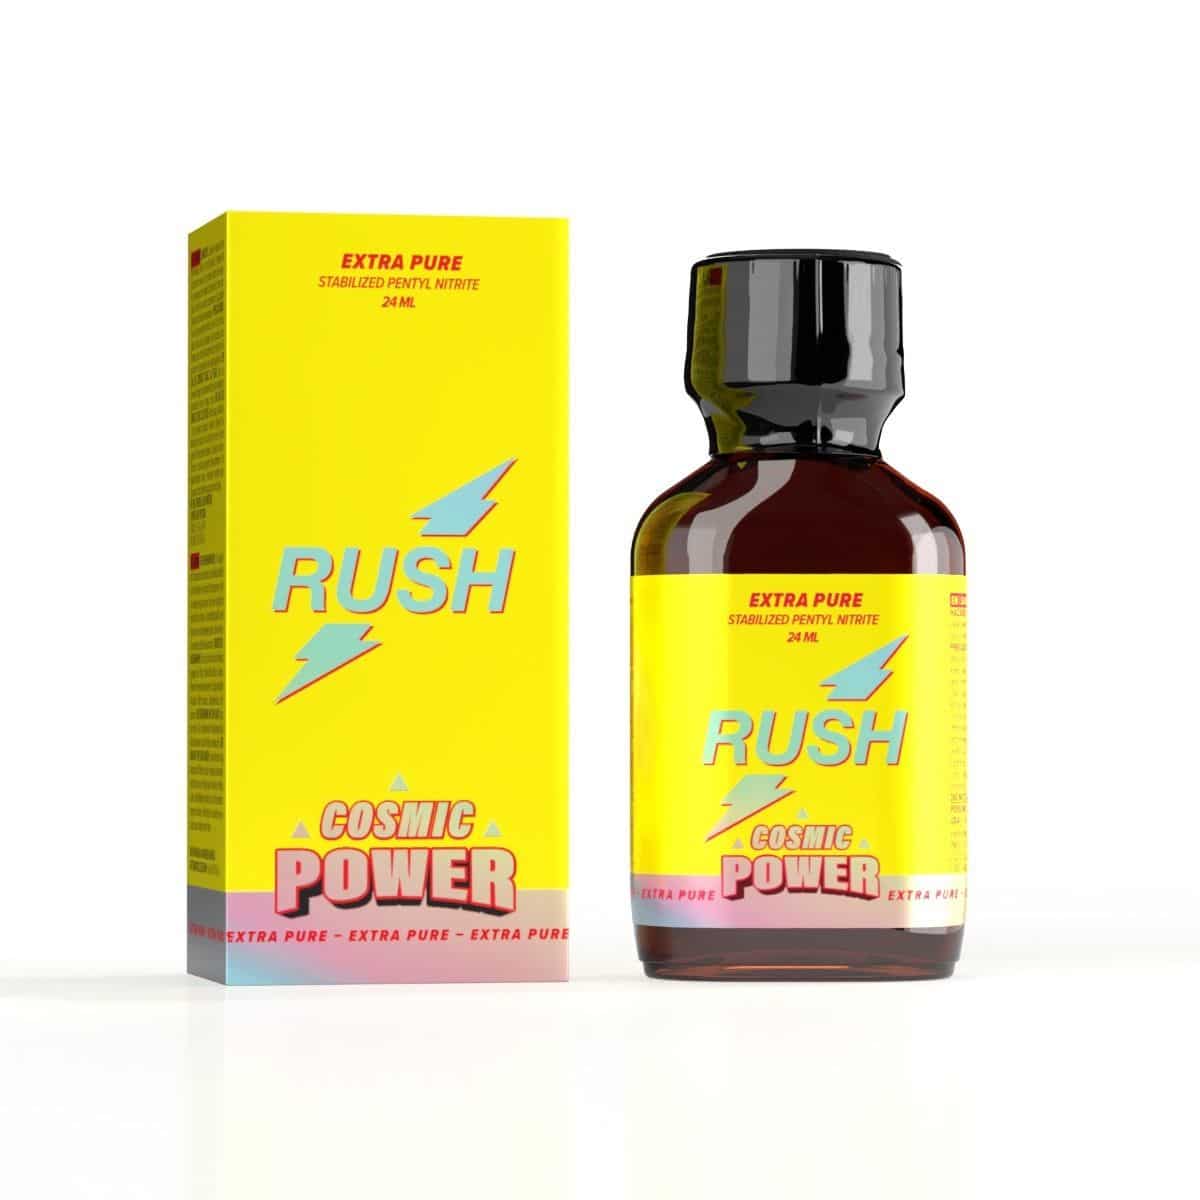 Rush Cosmic Power Pentyl: Extra pure energy with pentyl in a vibrant yellow box and bottle.